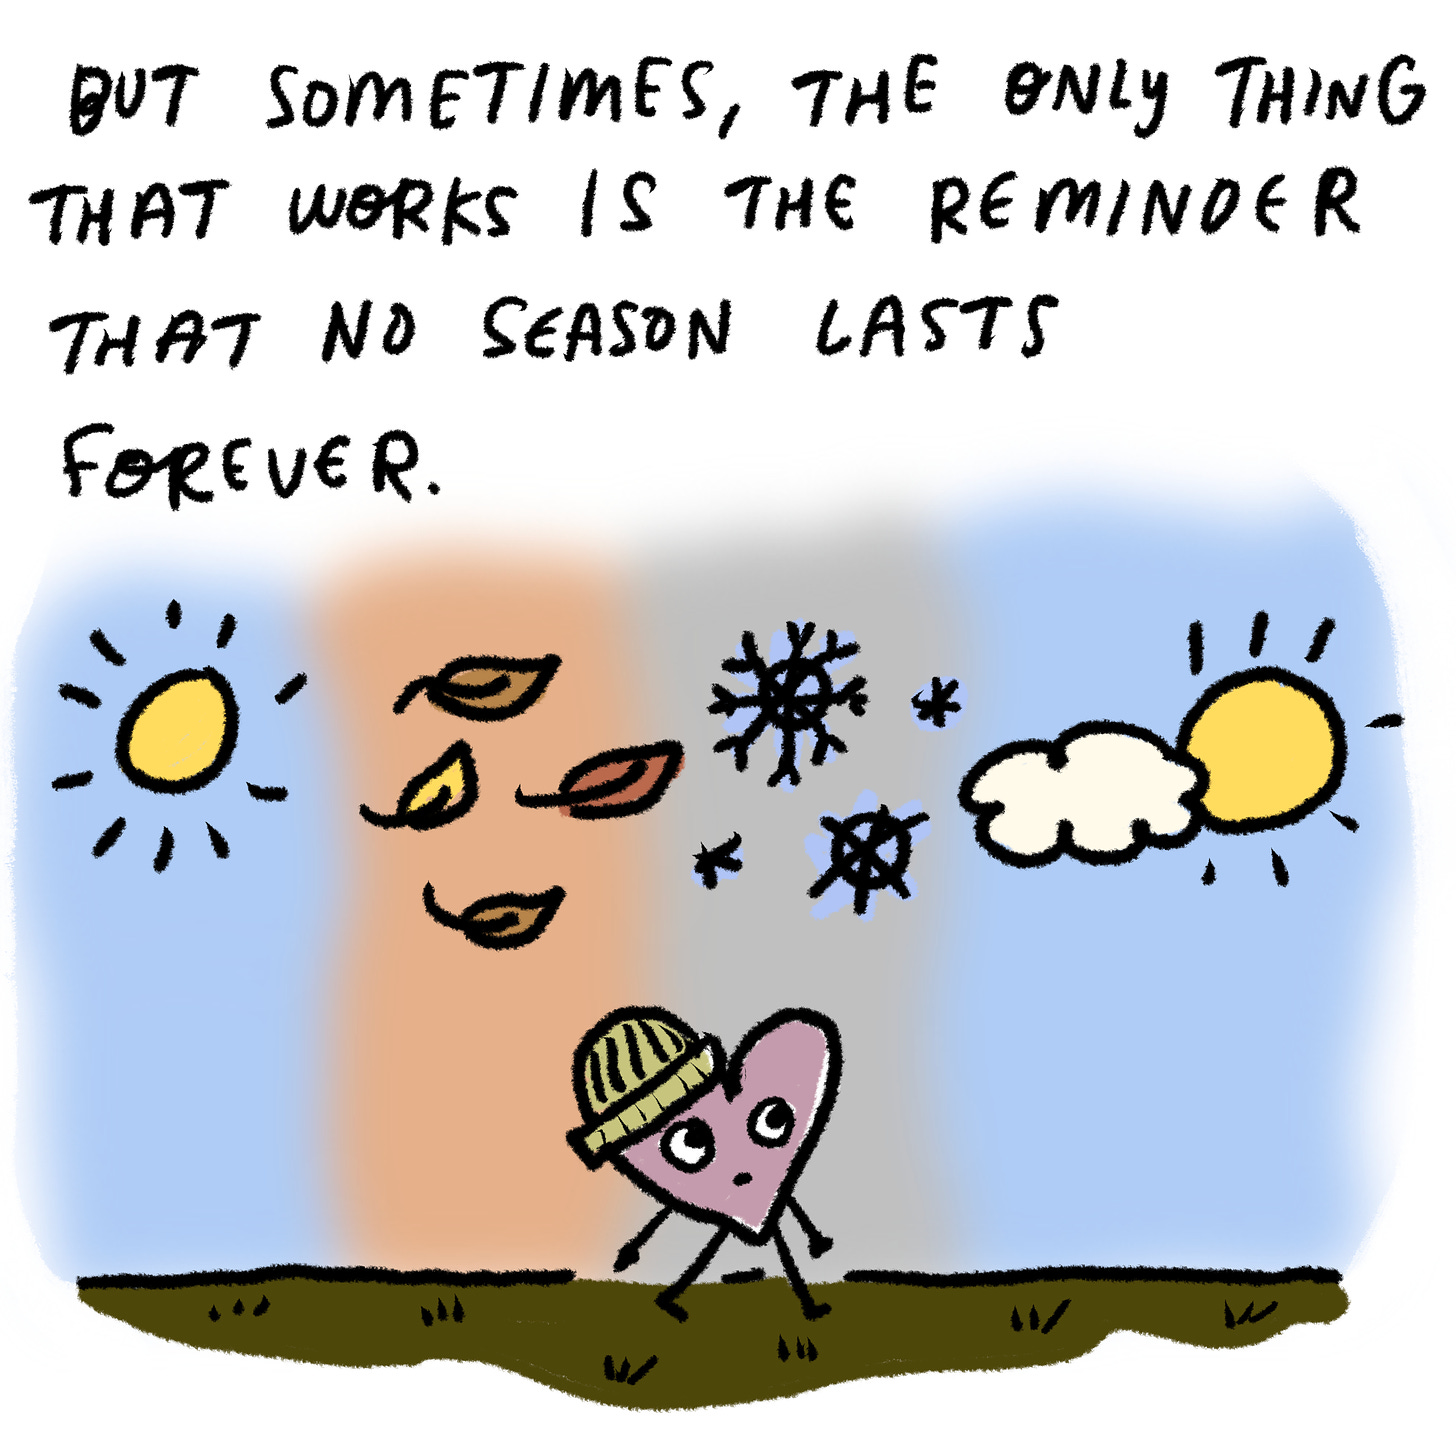 But sometimes, the only thing that works is the reminder that today will end, that no feeling (and no season!) lasts forever. 